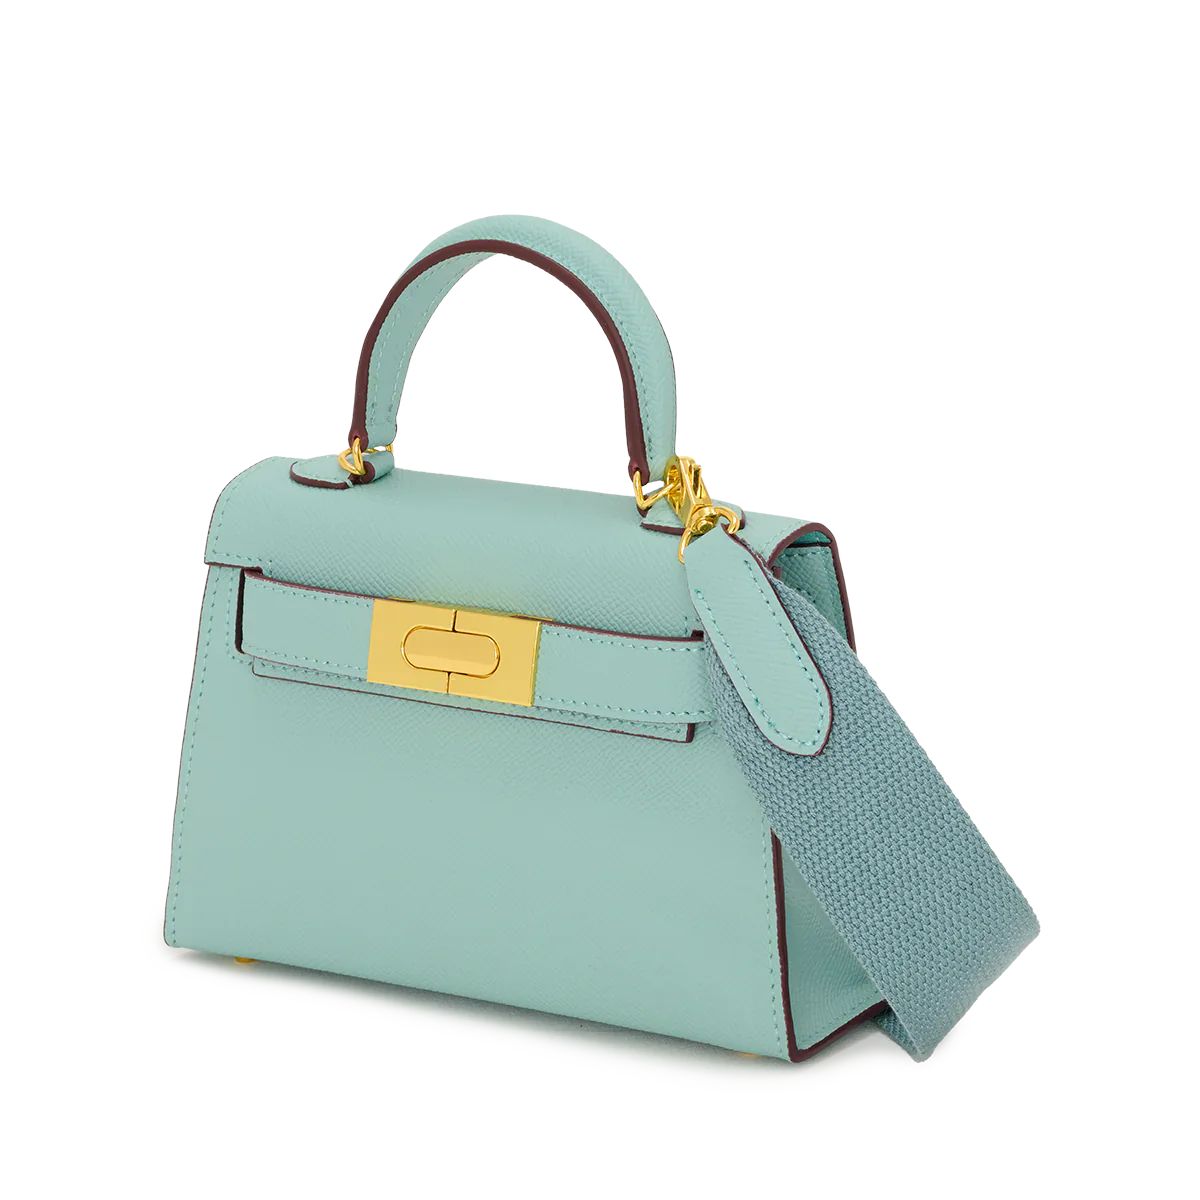 Lily and Bean Evie Leather Bag Sky Blue | Lily and Bean